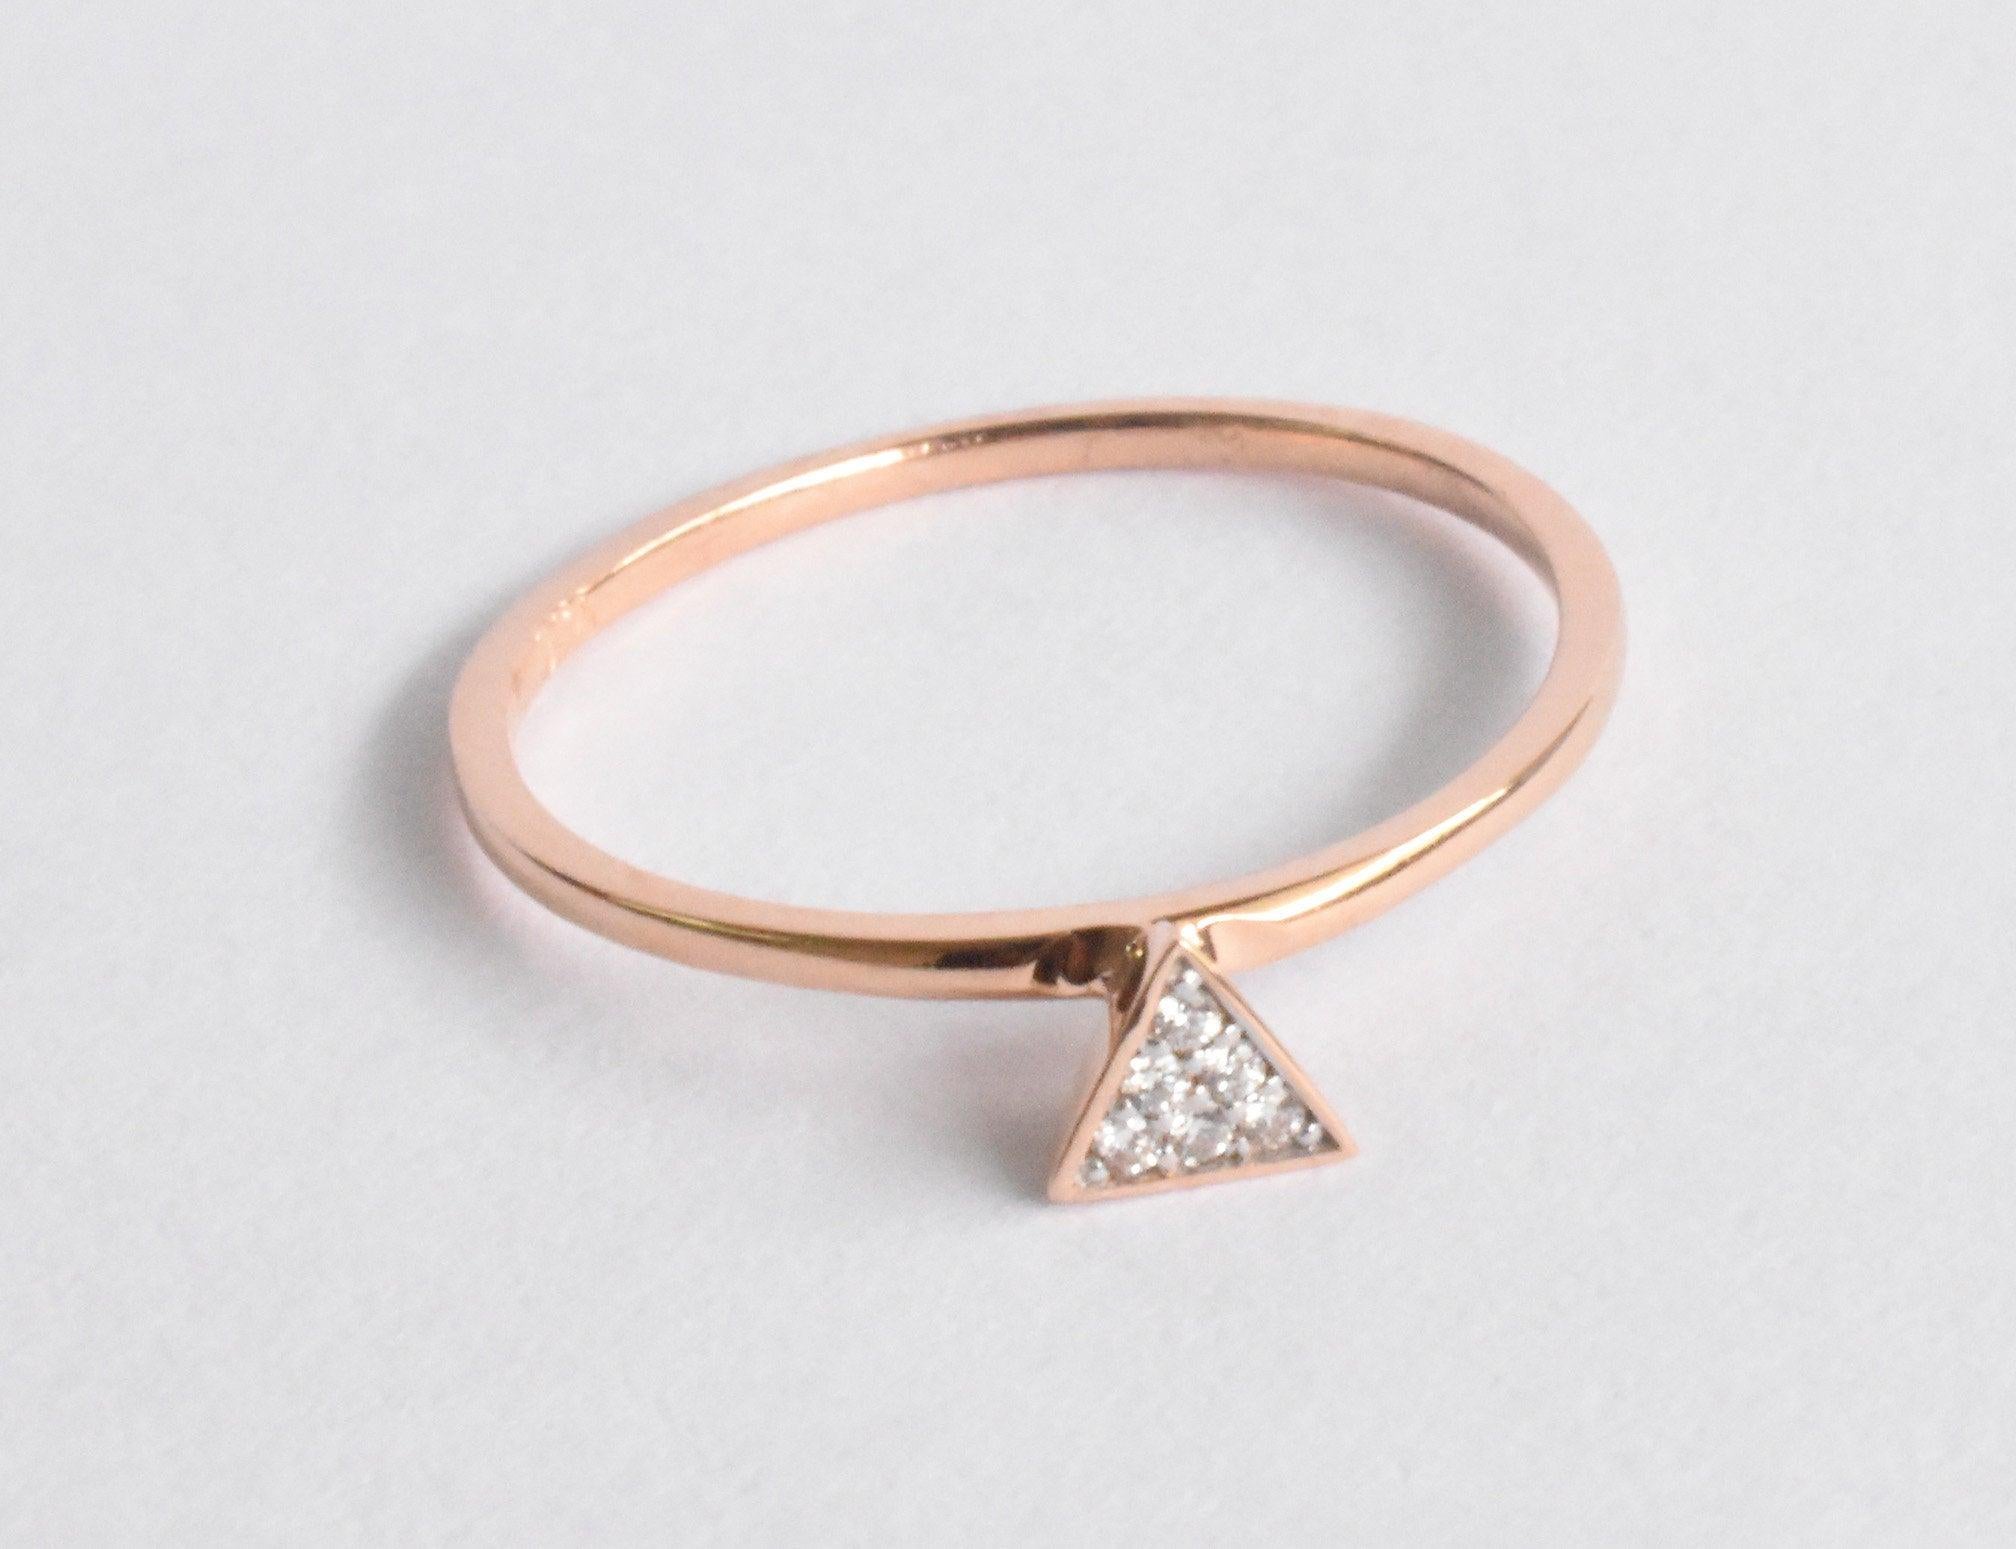 For Sale:  14k Gold Triangle Stacking Ring with White Pave Diamonds Minimalist Ring 2